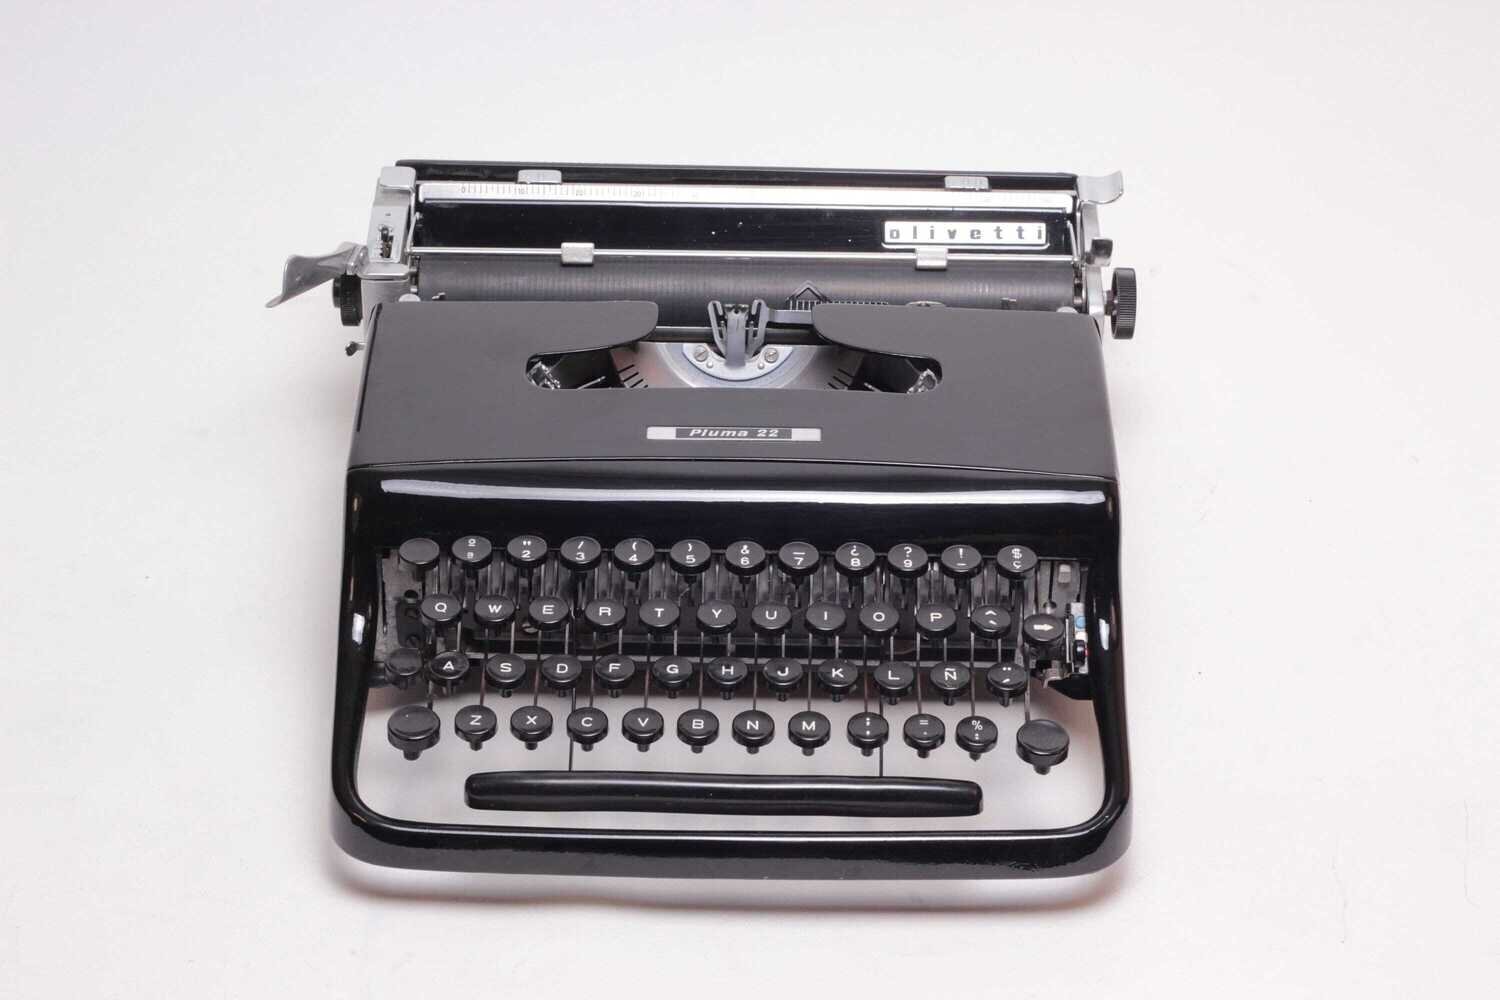 Limited Edition Olivetti Pluma 22 Black Typewriter, Vintage, Mint Condition, Manual Portable, Professionally Serviced by Typewriter.Company